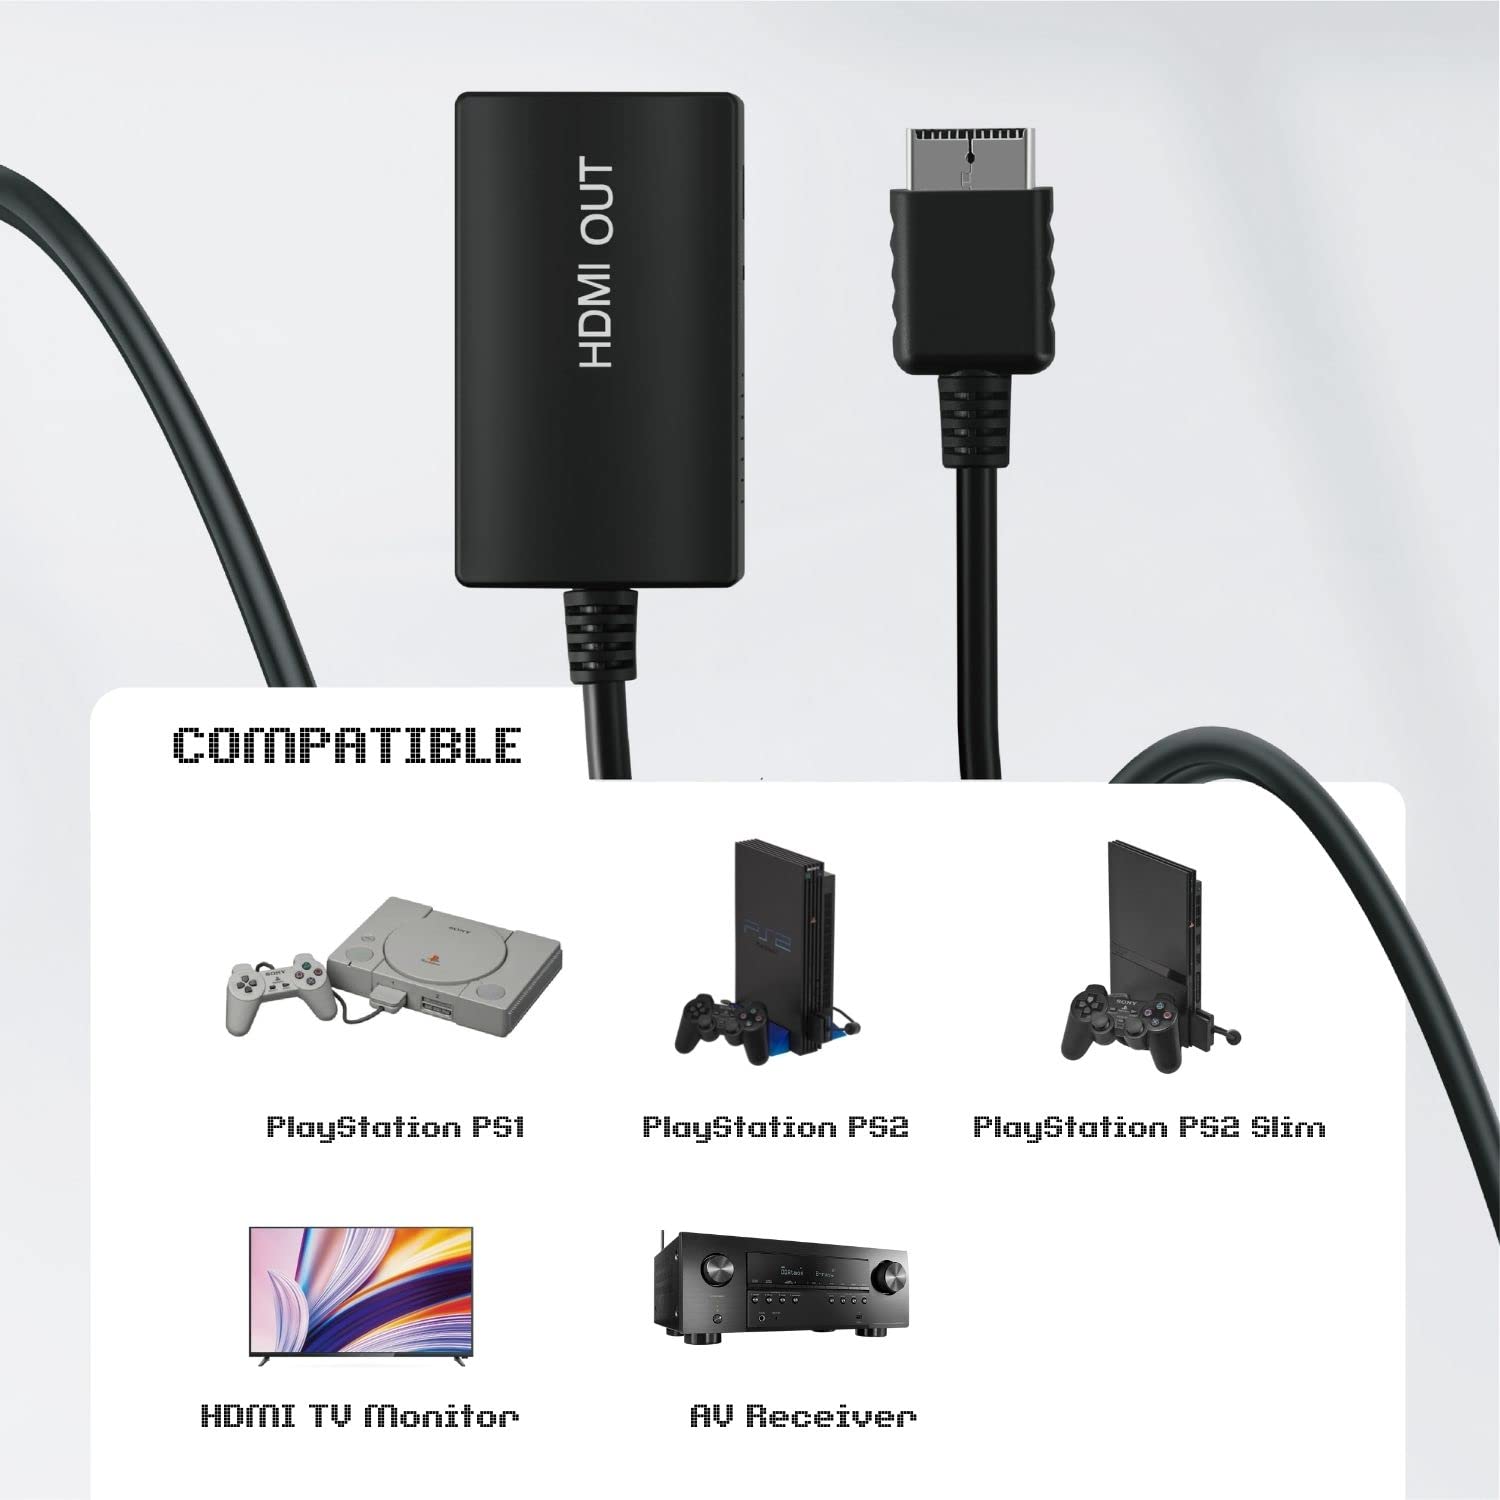 TNP PS2 HDMI Adapter HDMI Cable for Playstation Converter, Upscaler Link Cable Compatible with Playstation 1, 2, and 3 Game Consoles for HD TVs, Monitors, and Projectors